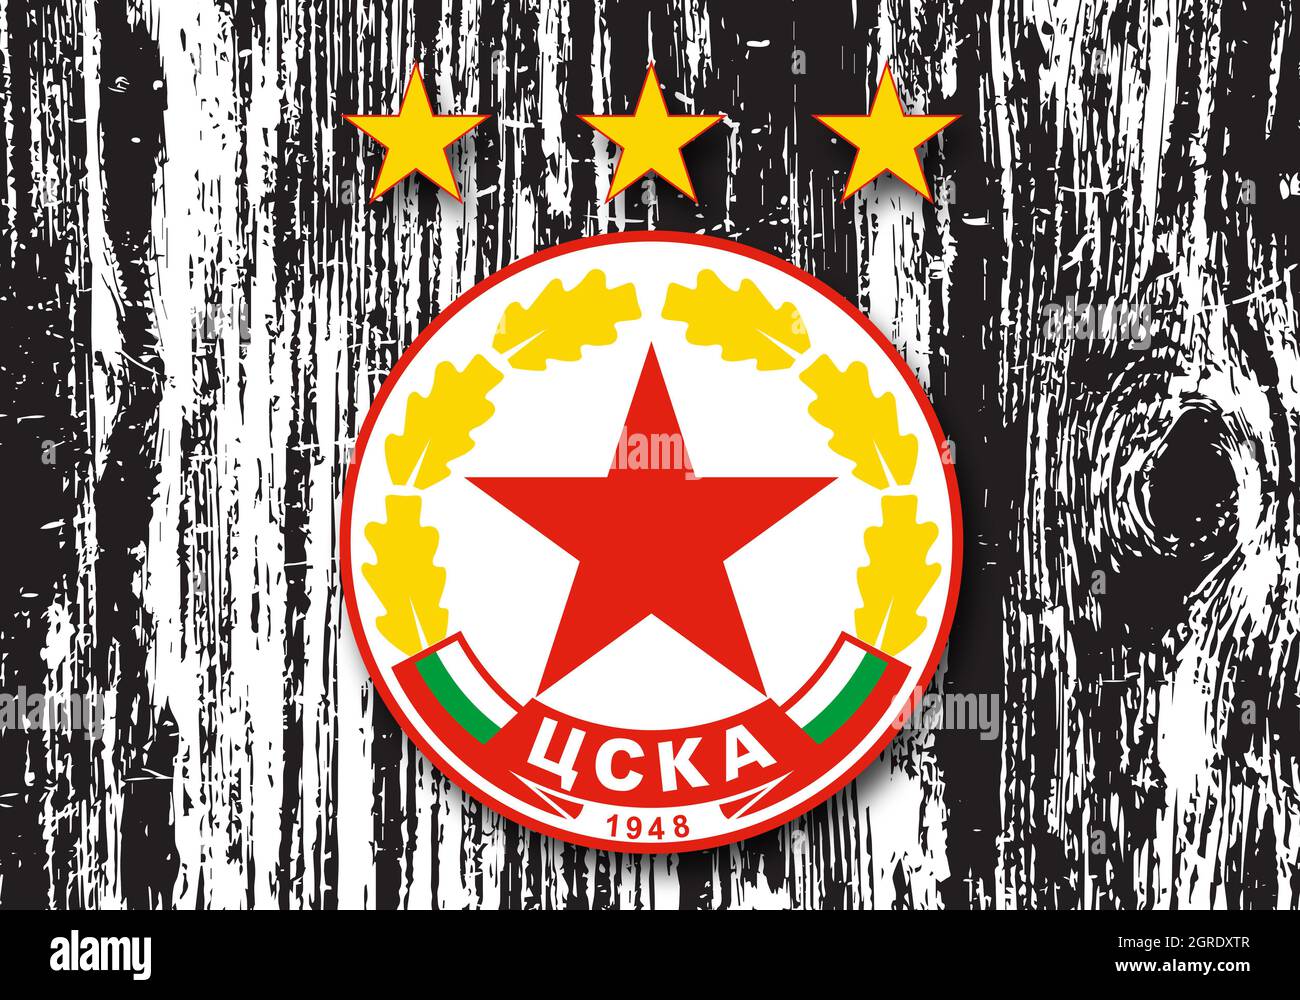 Coat of arms PFC CSKA Sofia, football club from Bulgaria, wooden background Stock Photo